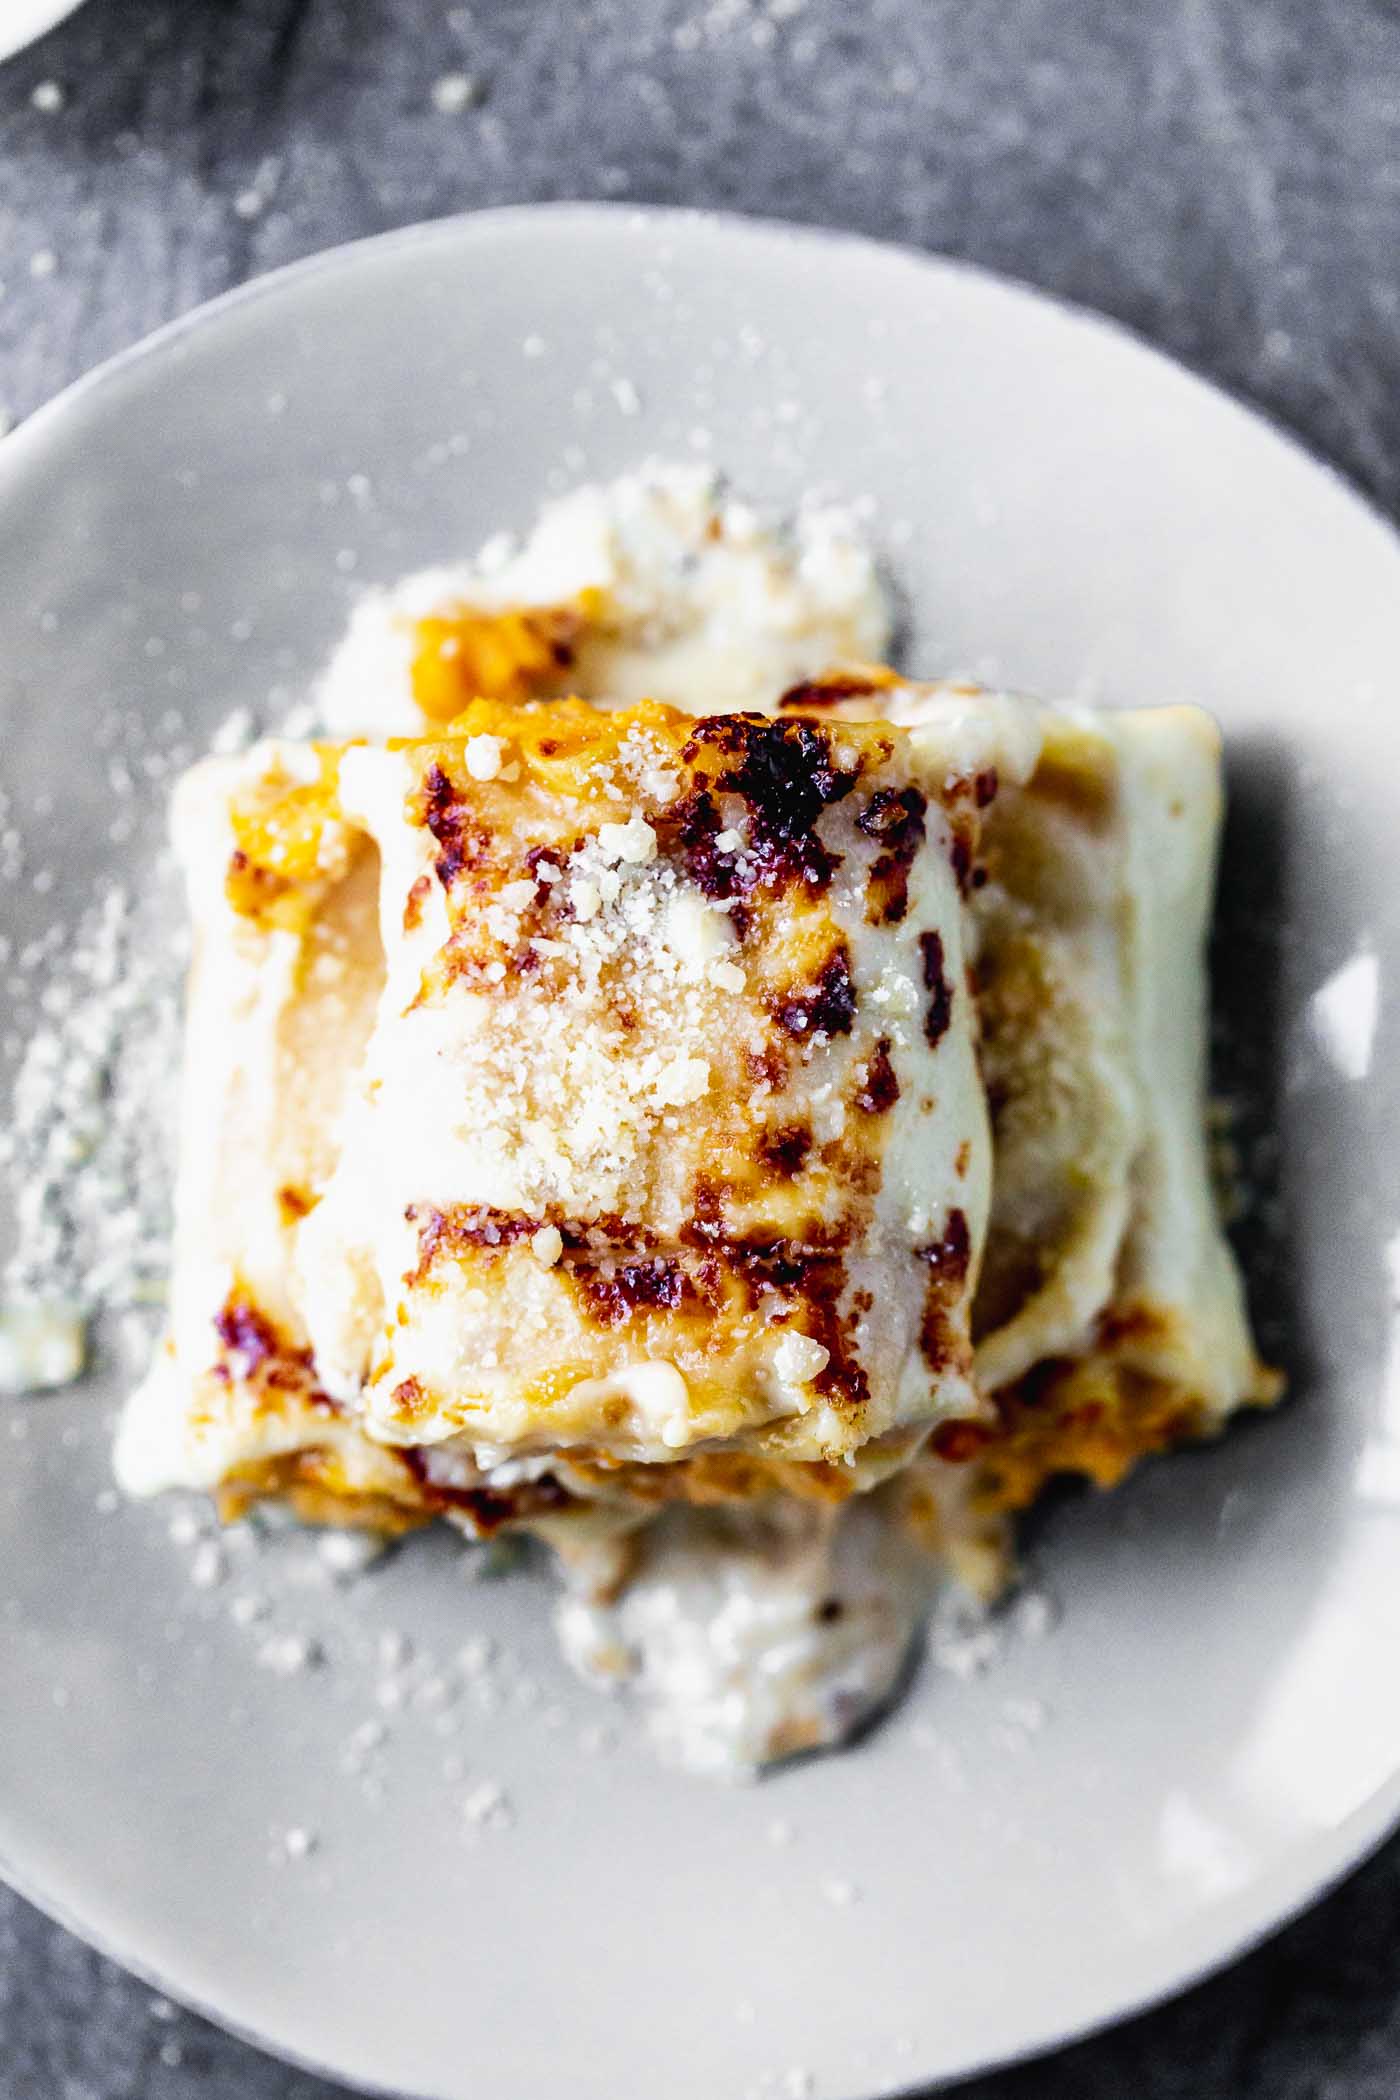 Butternut Squash Lasagna Rolls are cozy, rich and oh-so delicious. With only six ingredients, they're a cinch to throw together, and sure to impress a crowd.